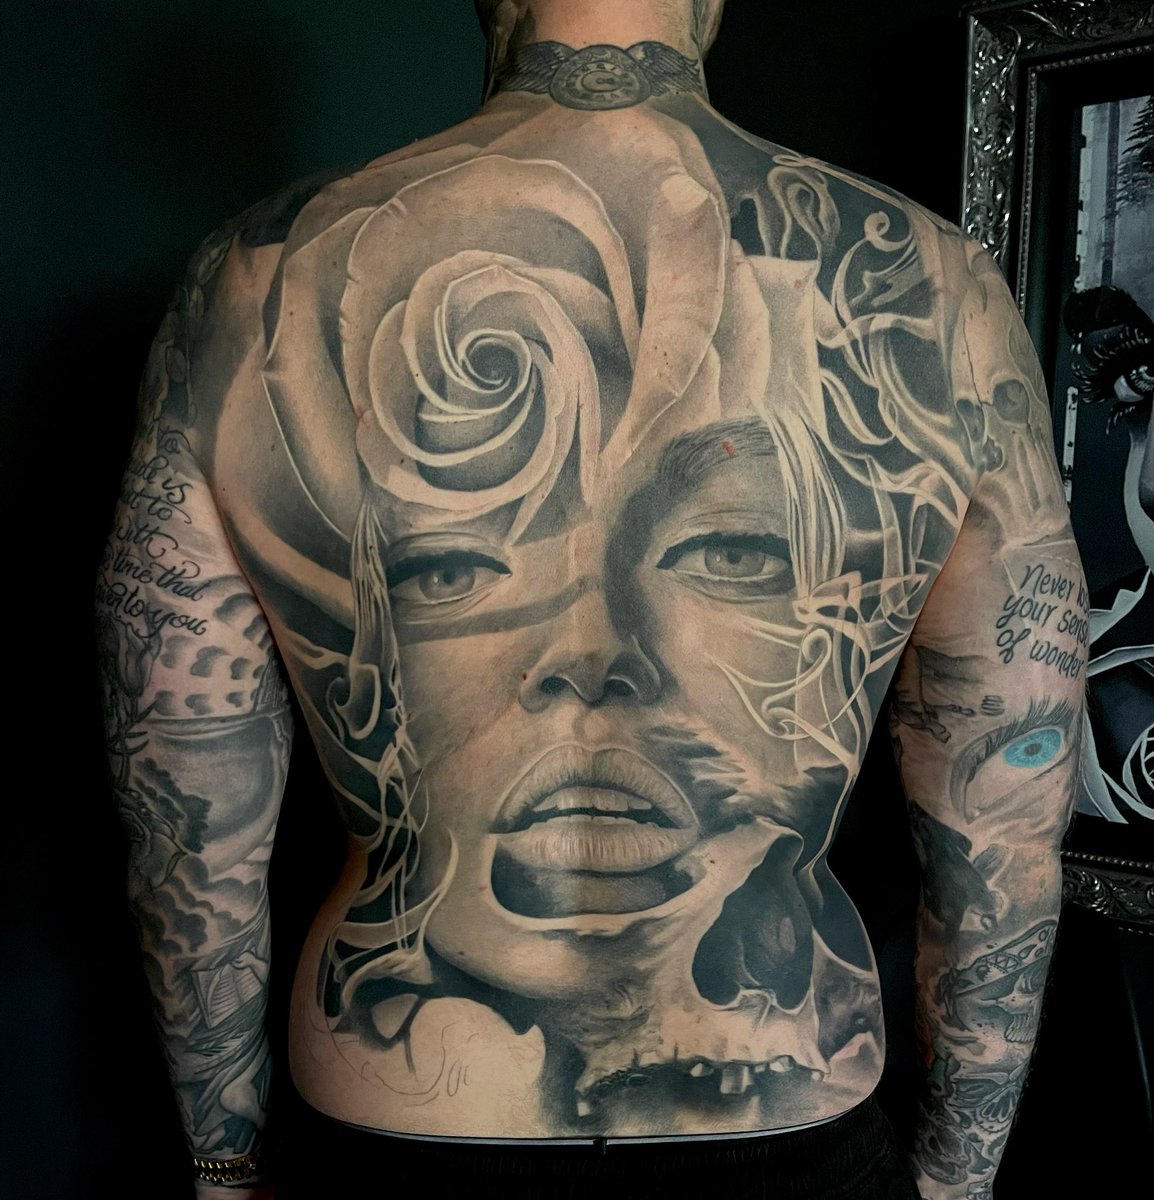 Got a healed shot of @bennicky back piece when we caught up at the weekend. Just a small session in the corner to finish, it’s been a fun one! 🙏🏼🙌🏼❤️